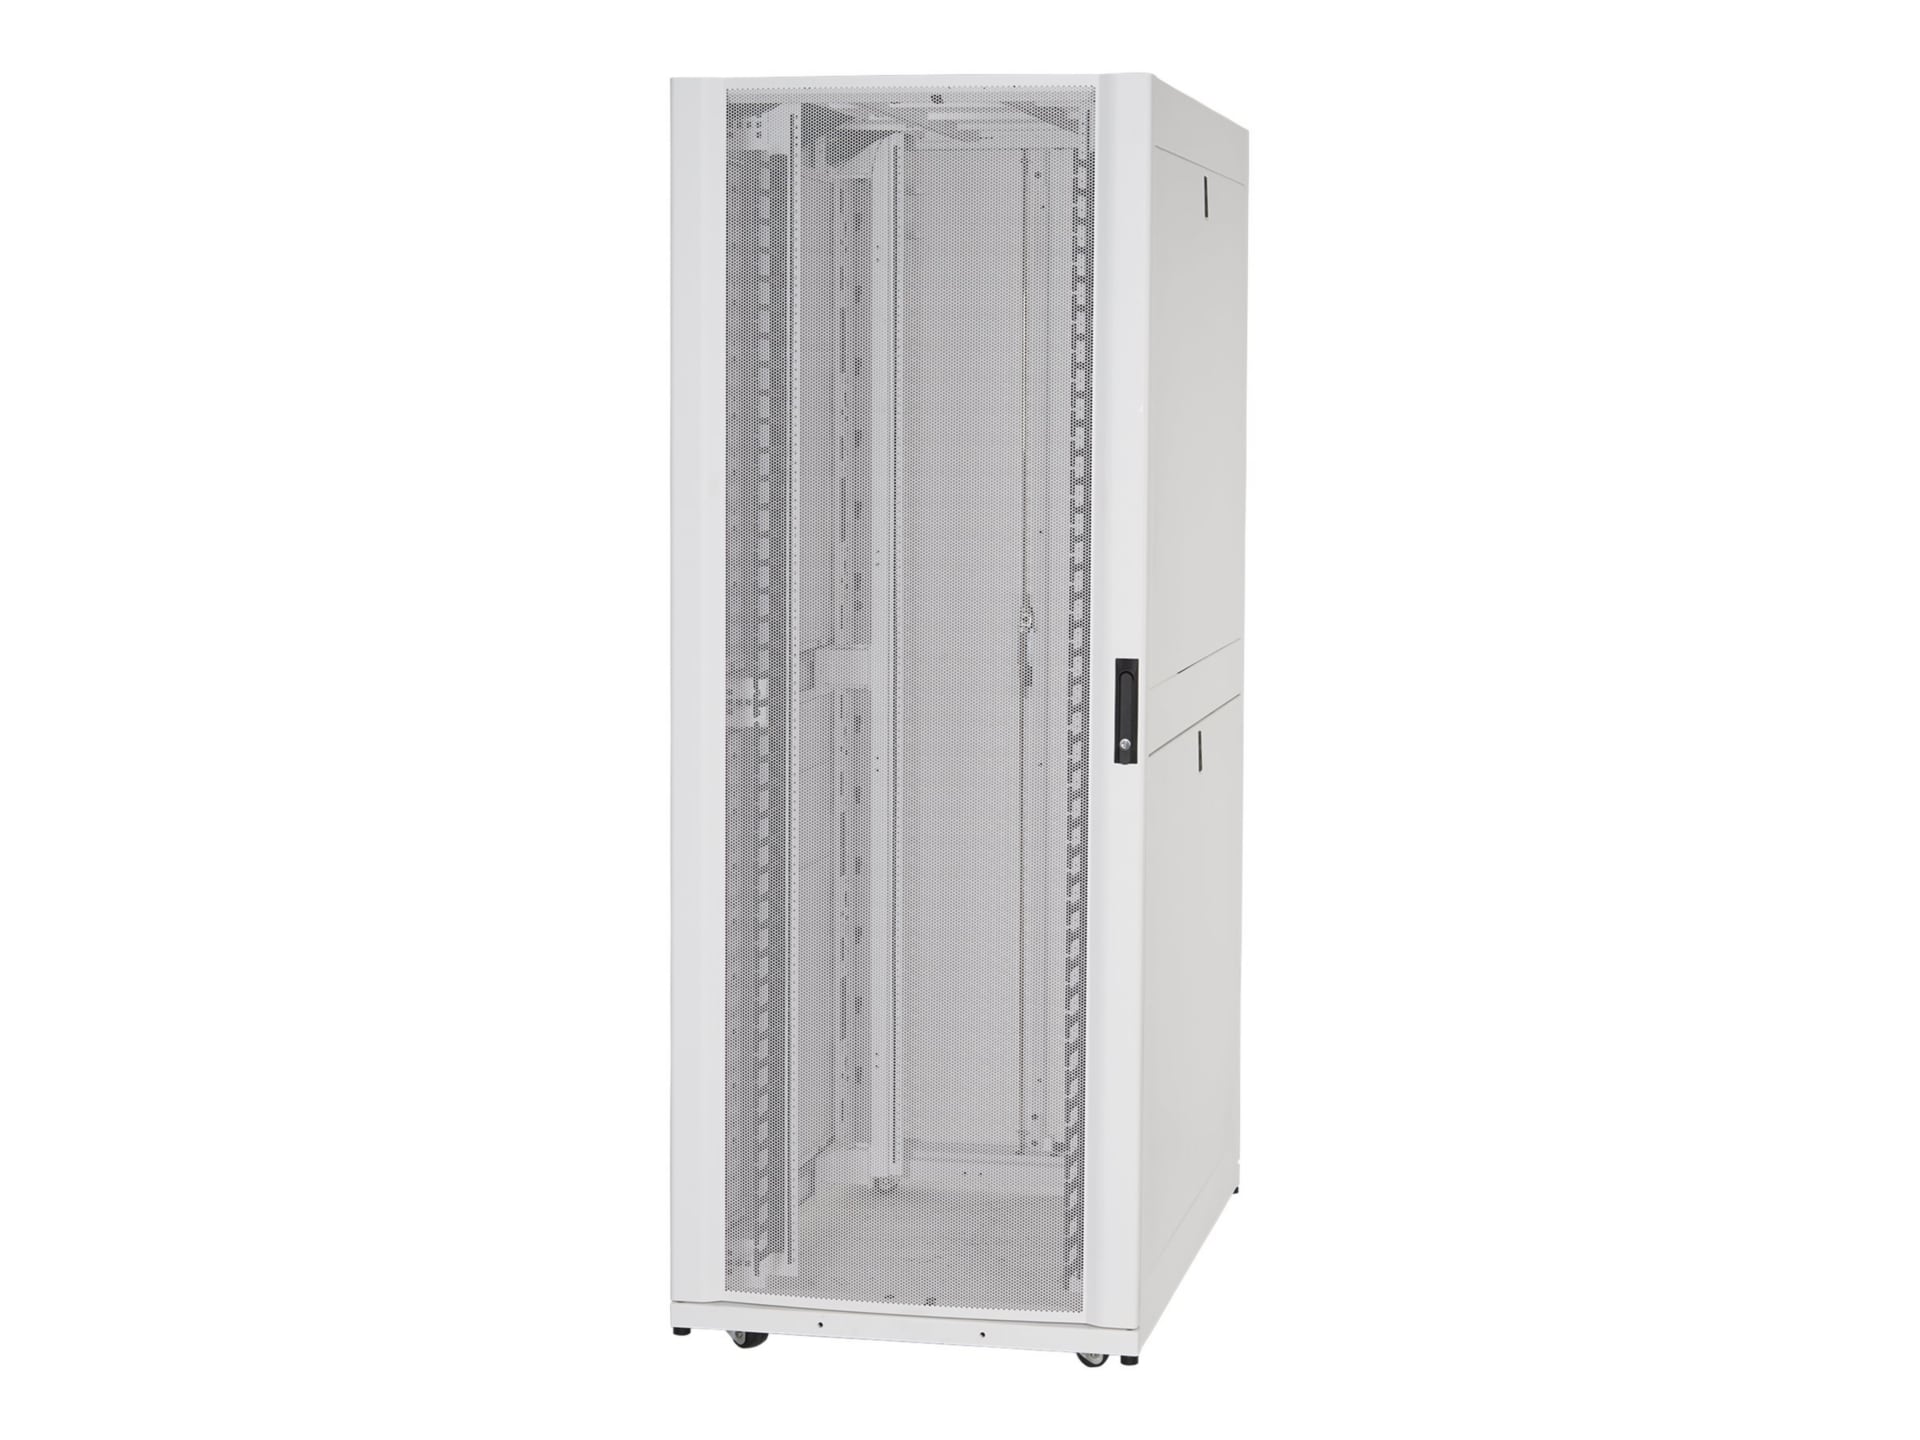 APC by Schneider Electric NetShelter SX 42U 750mm Wide x 1200mm Deep Networking Enclosure with Sides White